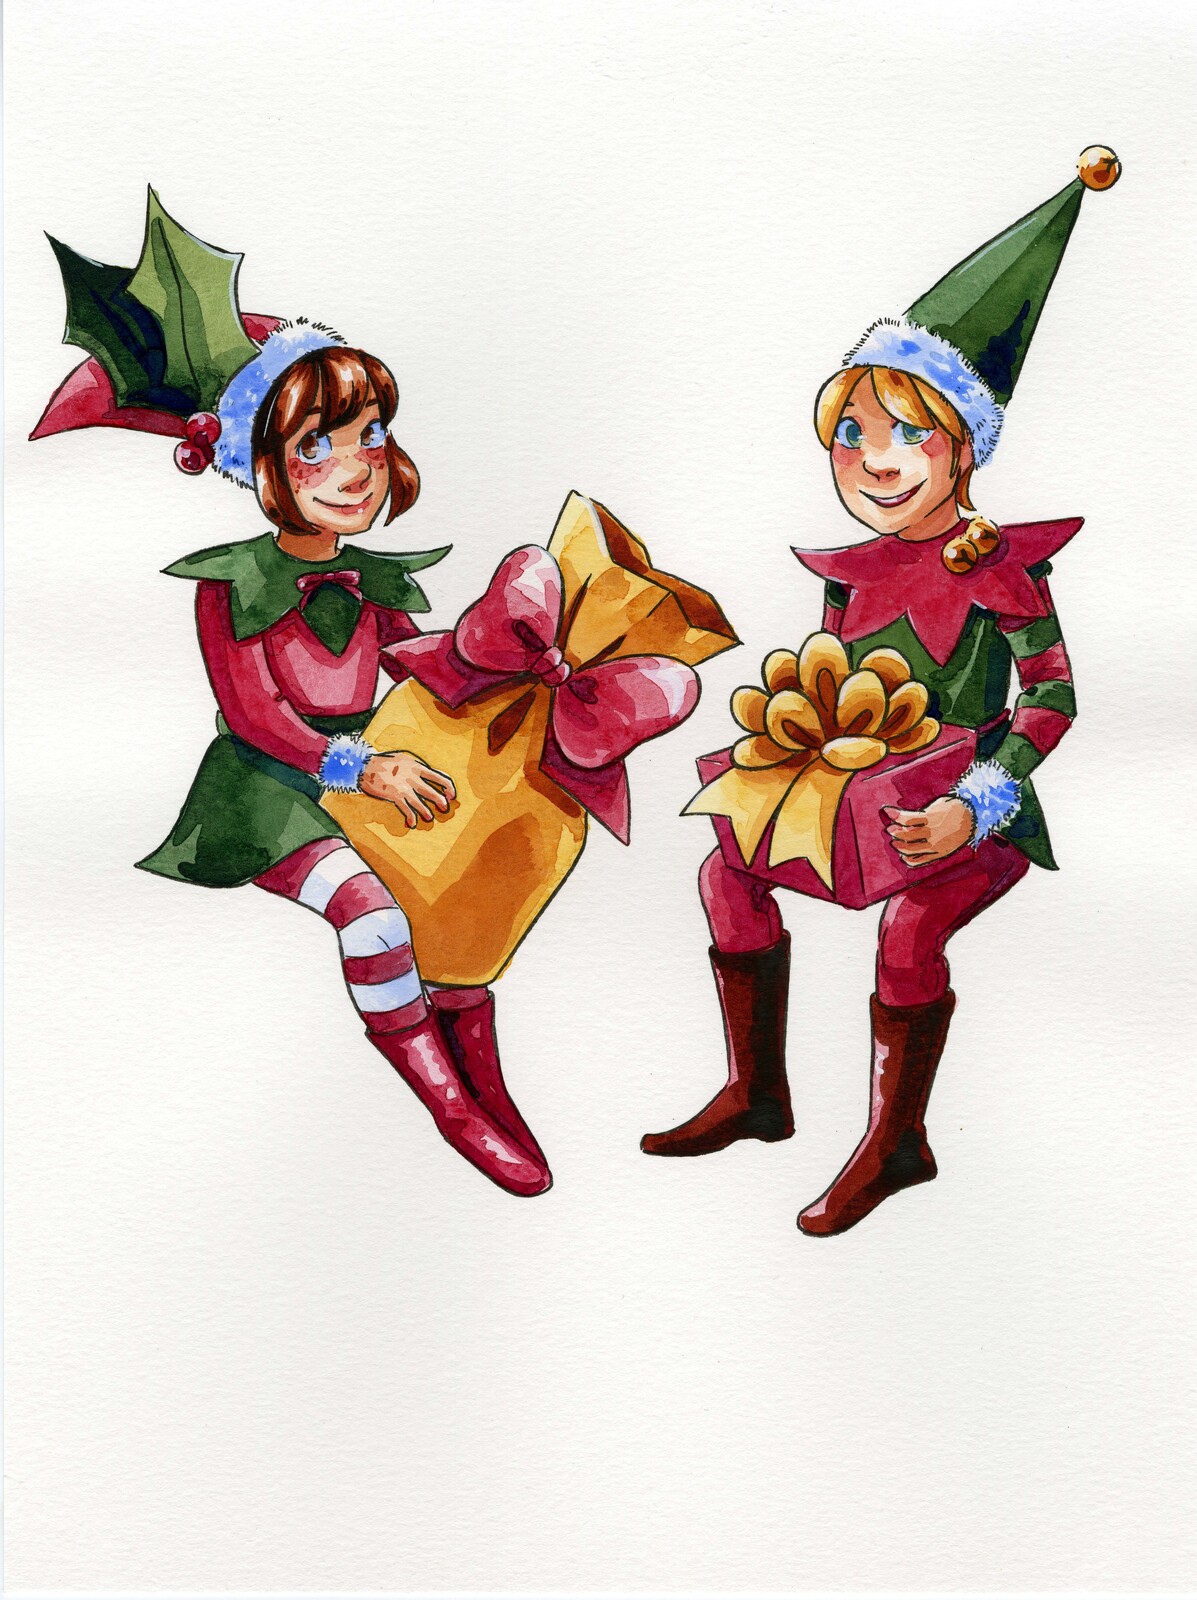 Papercraftmas Day 2: Shelf Sitters- Printable Watercolor Illustration